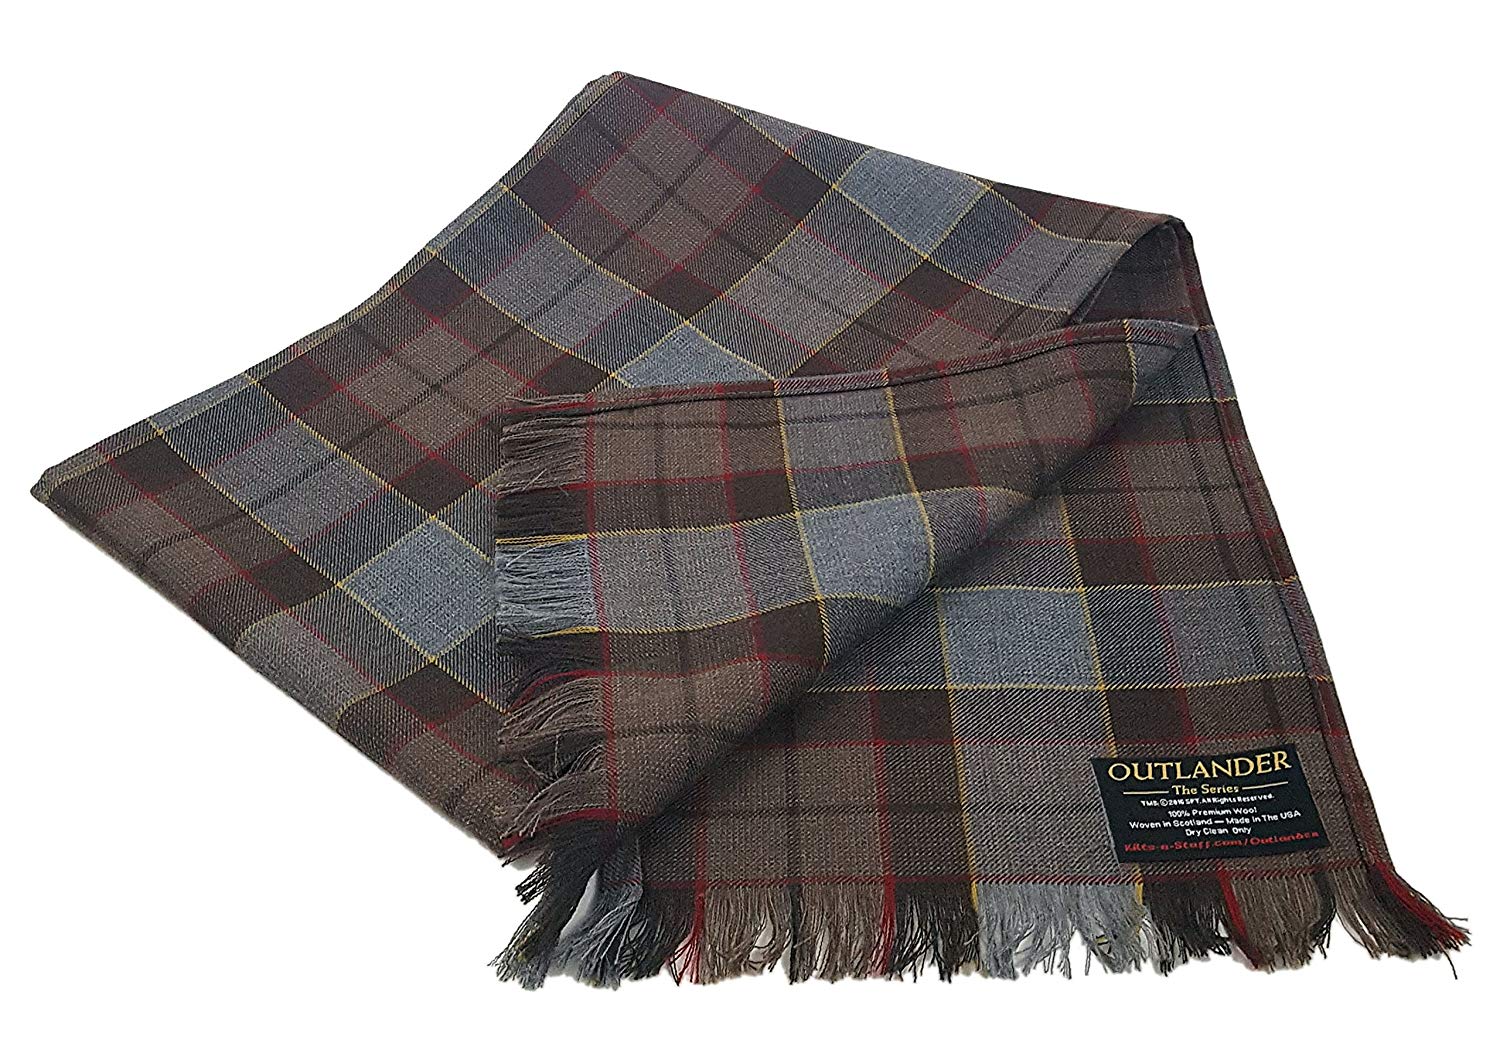 ABBYSHOT Outlander Clan Fraser Lambswool Scarf Prop Replica NEW 